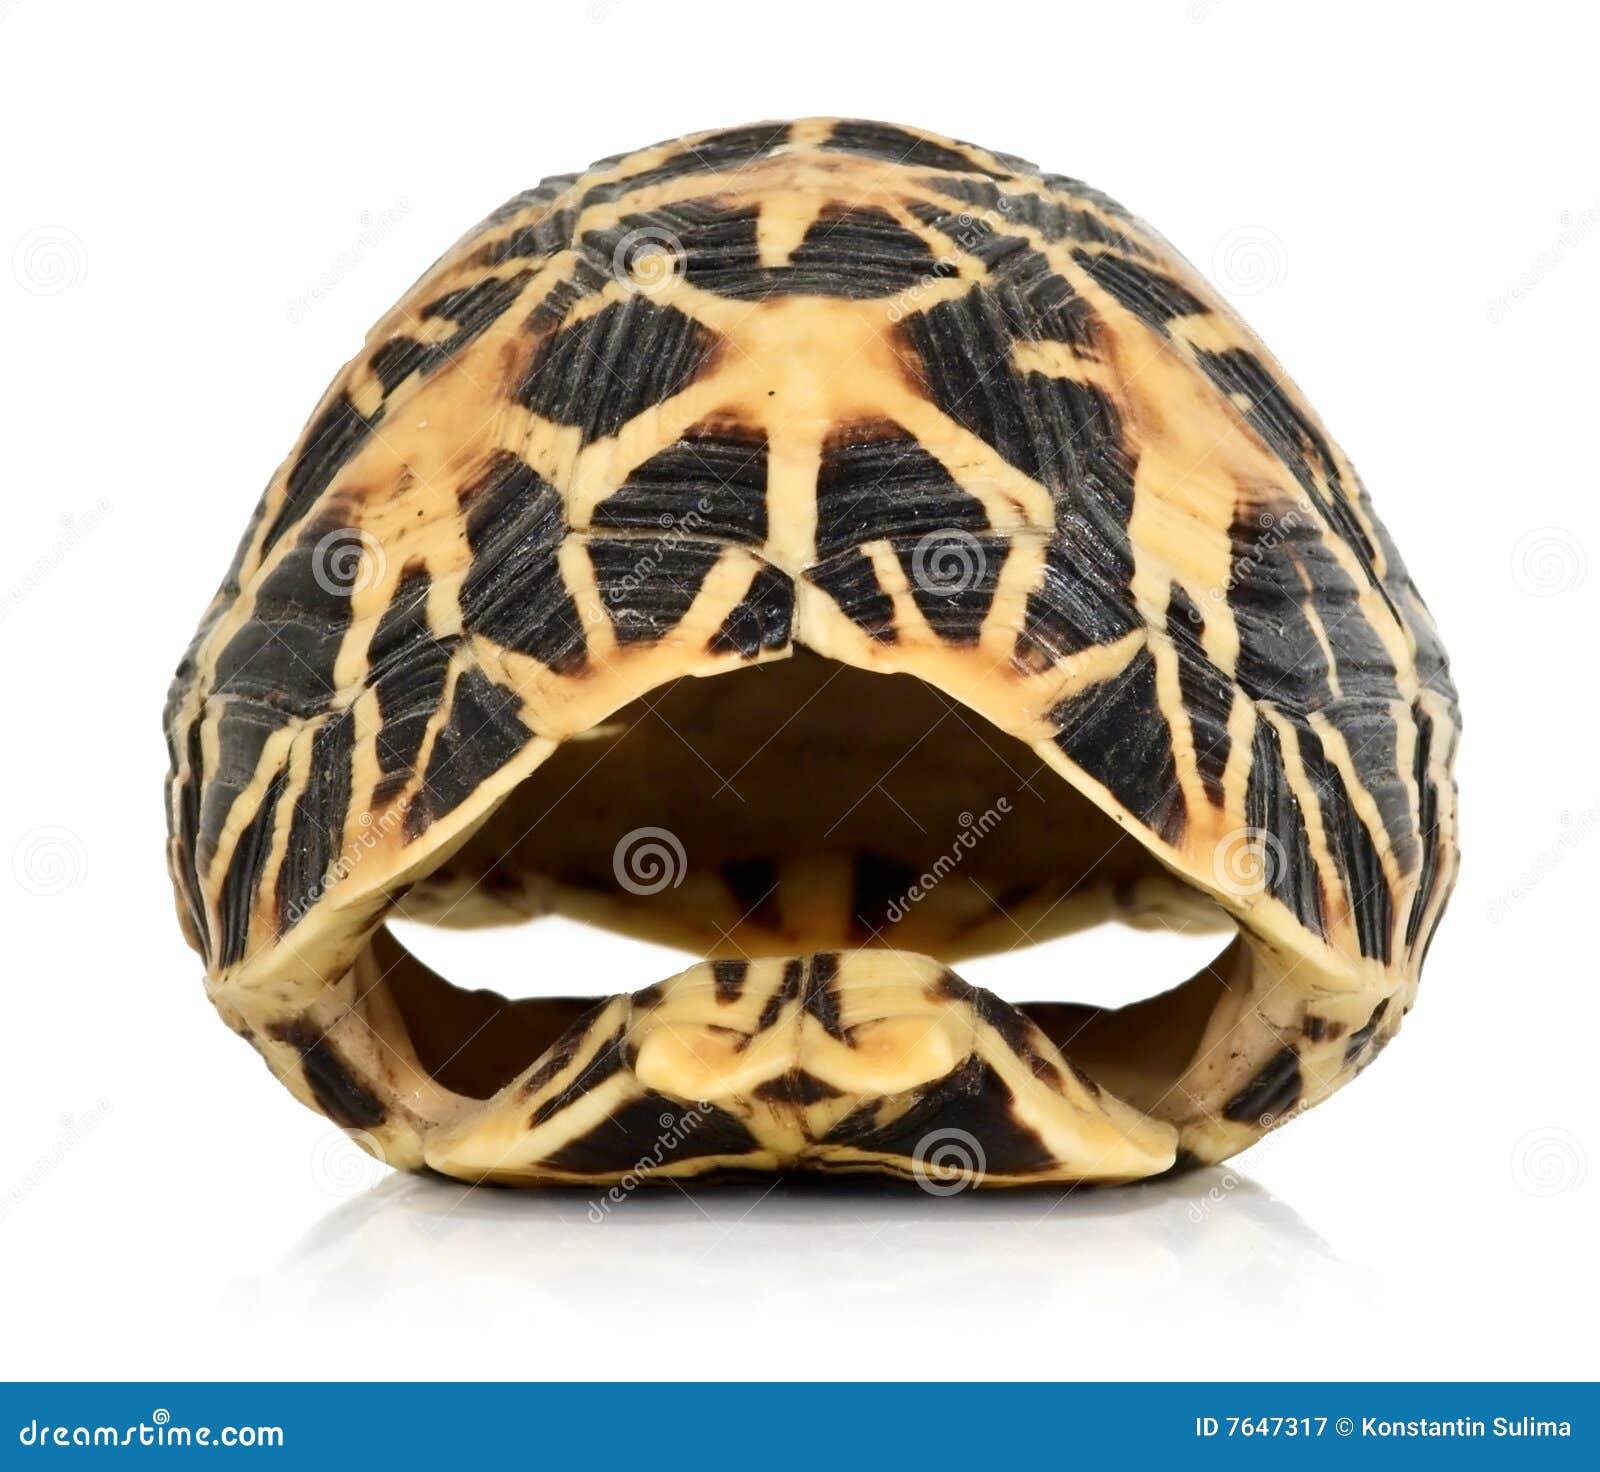 front-turtles-shell-isolated-7647317.jpg